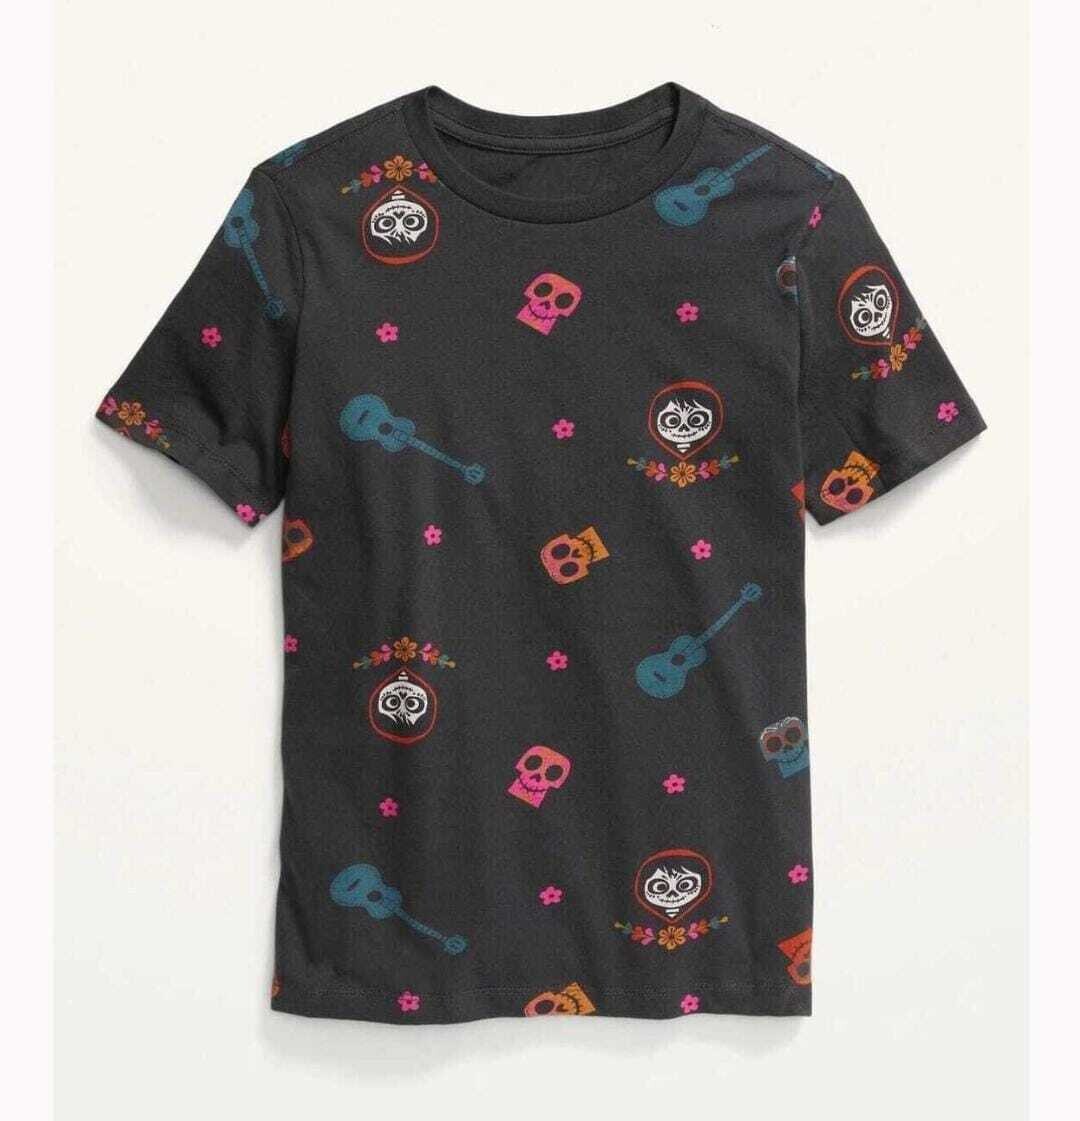 Old Navy Boys Graphic T-Shirt